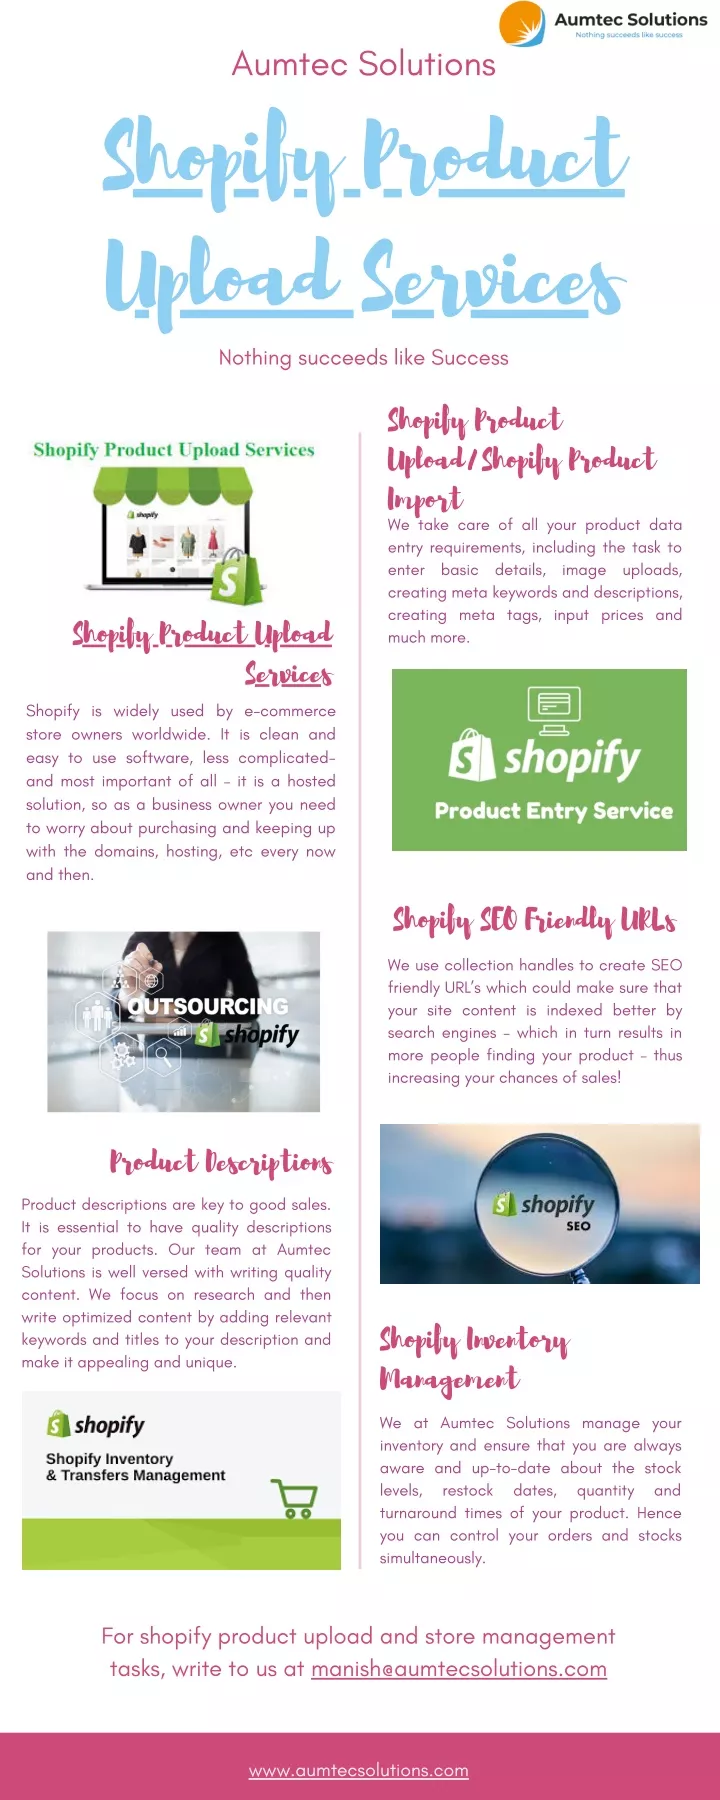 aumtec solutions shopify product upload services